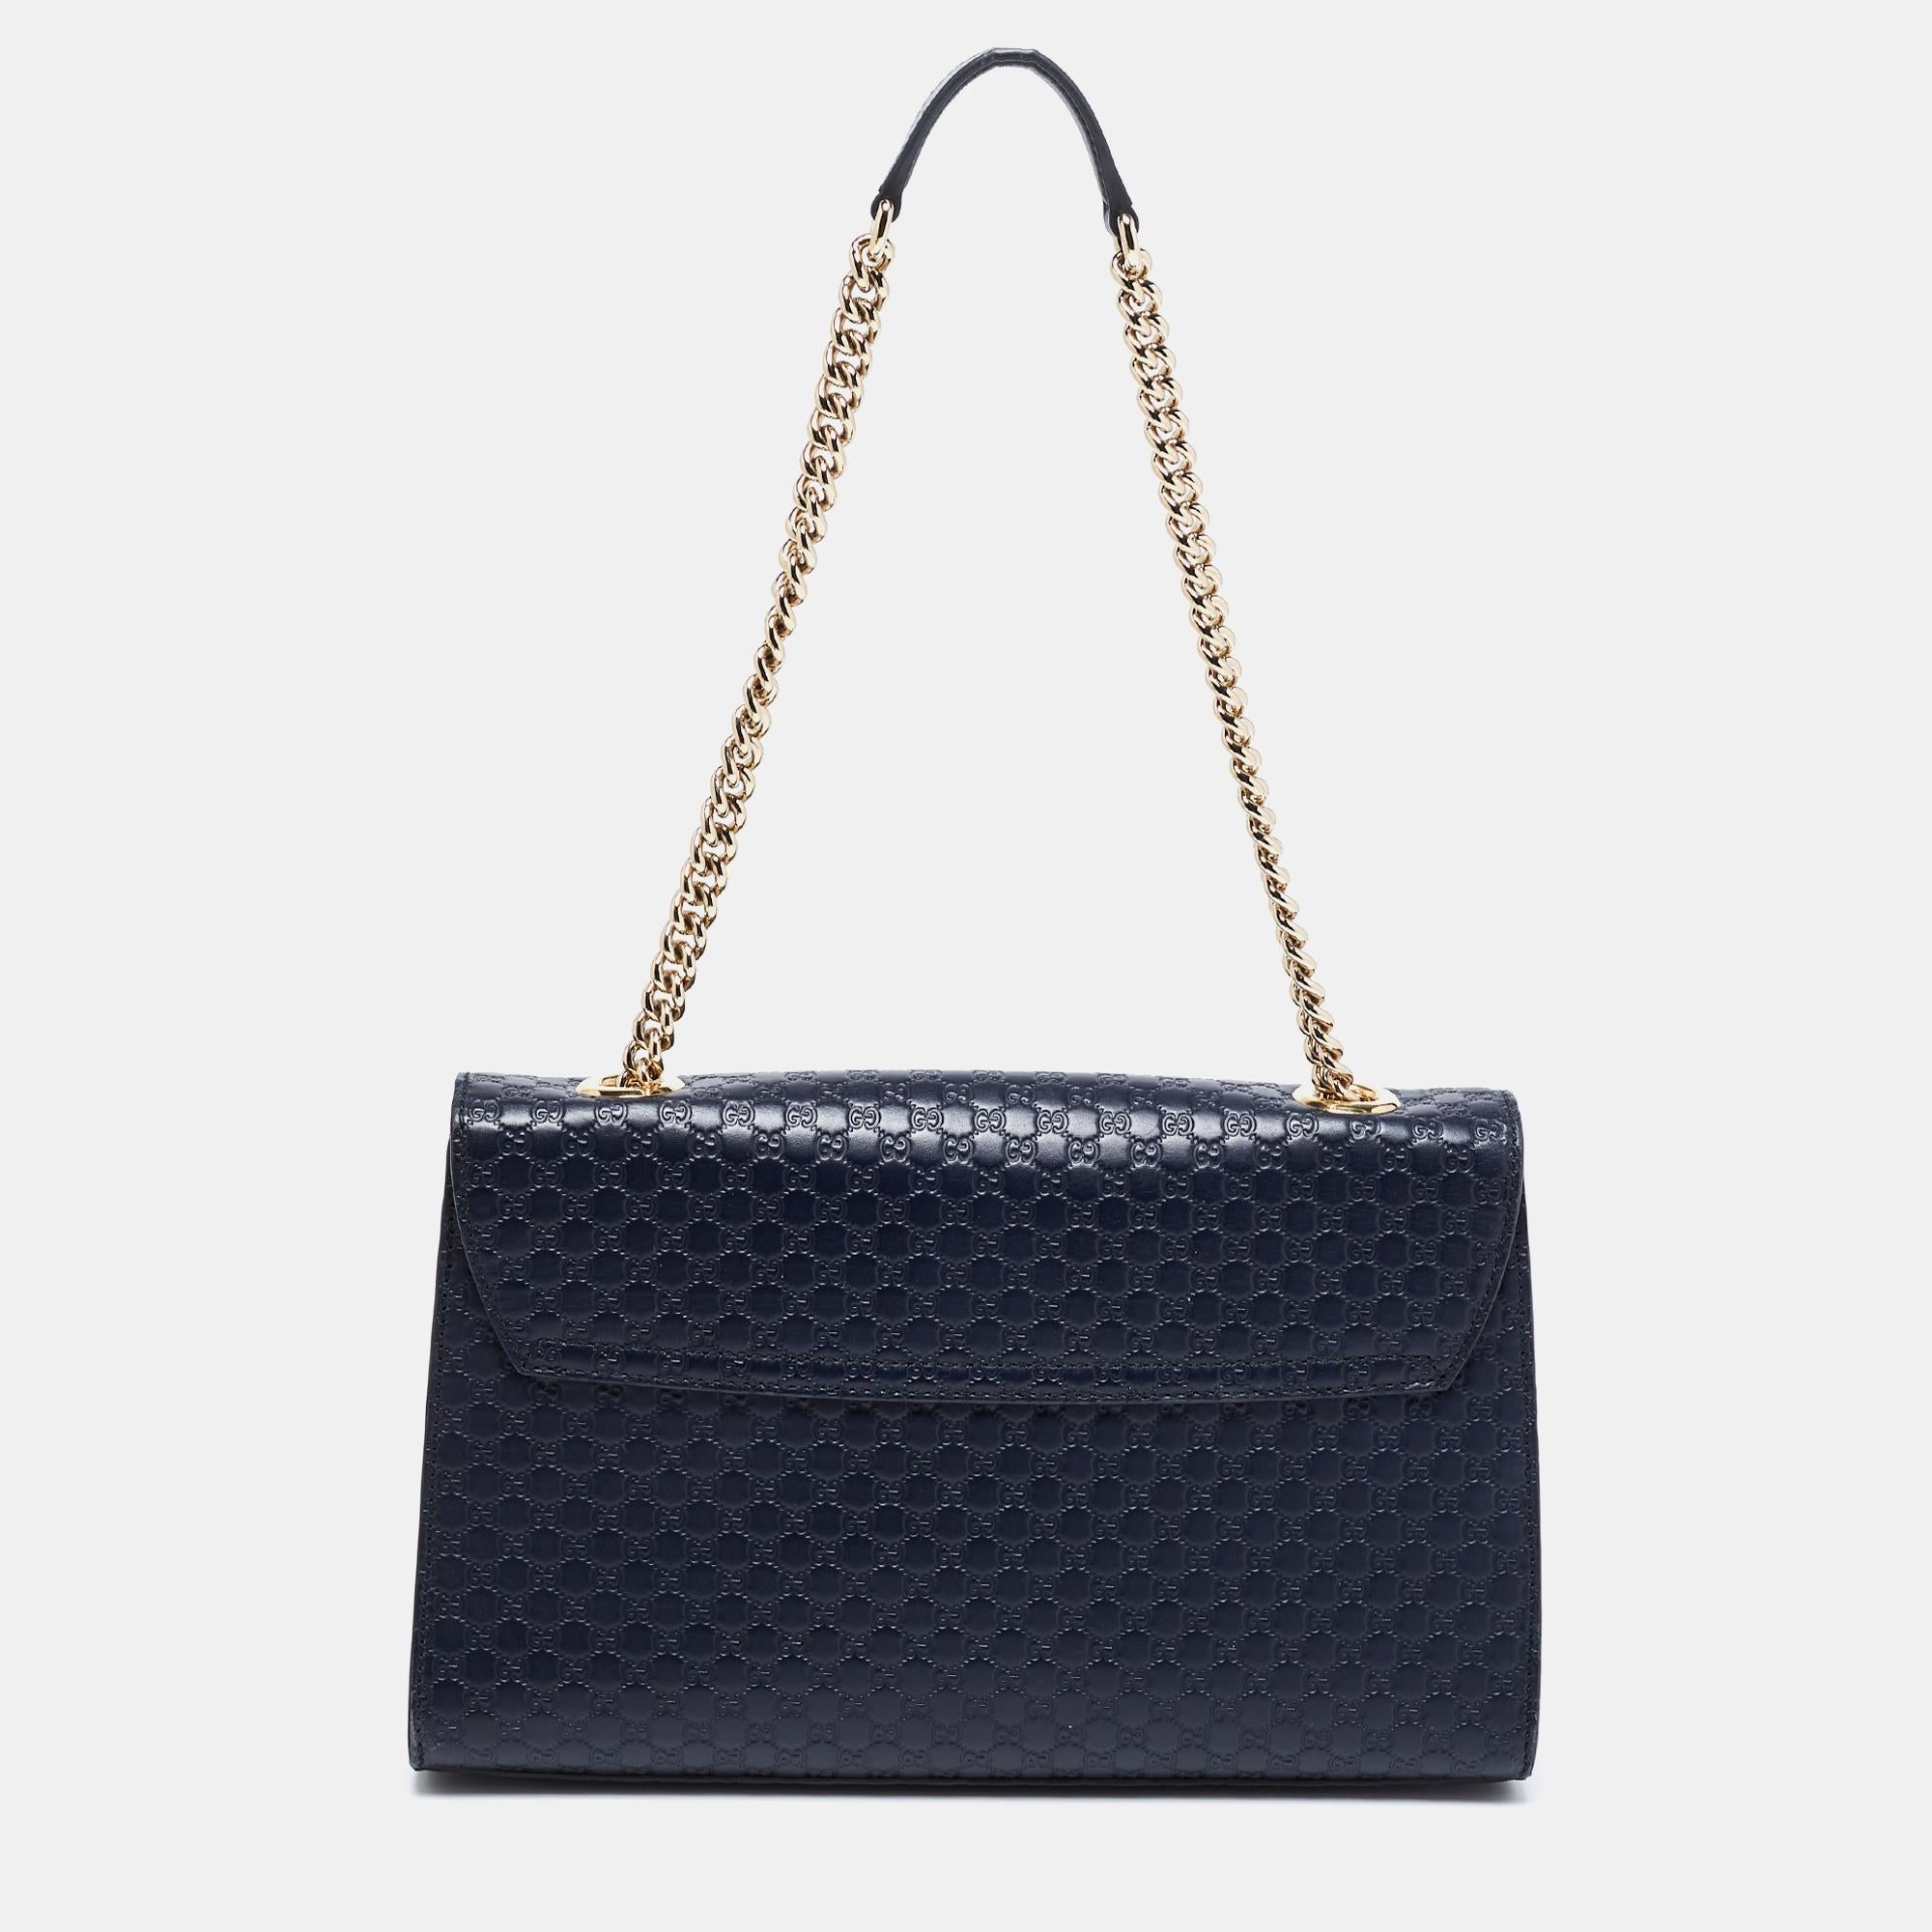 With a perfect blend of archival details and contemporary design, this Gucci Emily bag is desirable. It has impressed style enthusiasts with its understated charm and embodies an architectural shape. Made from Microguccissima leather, it can be